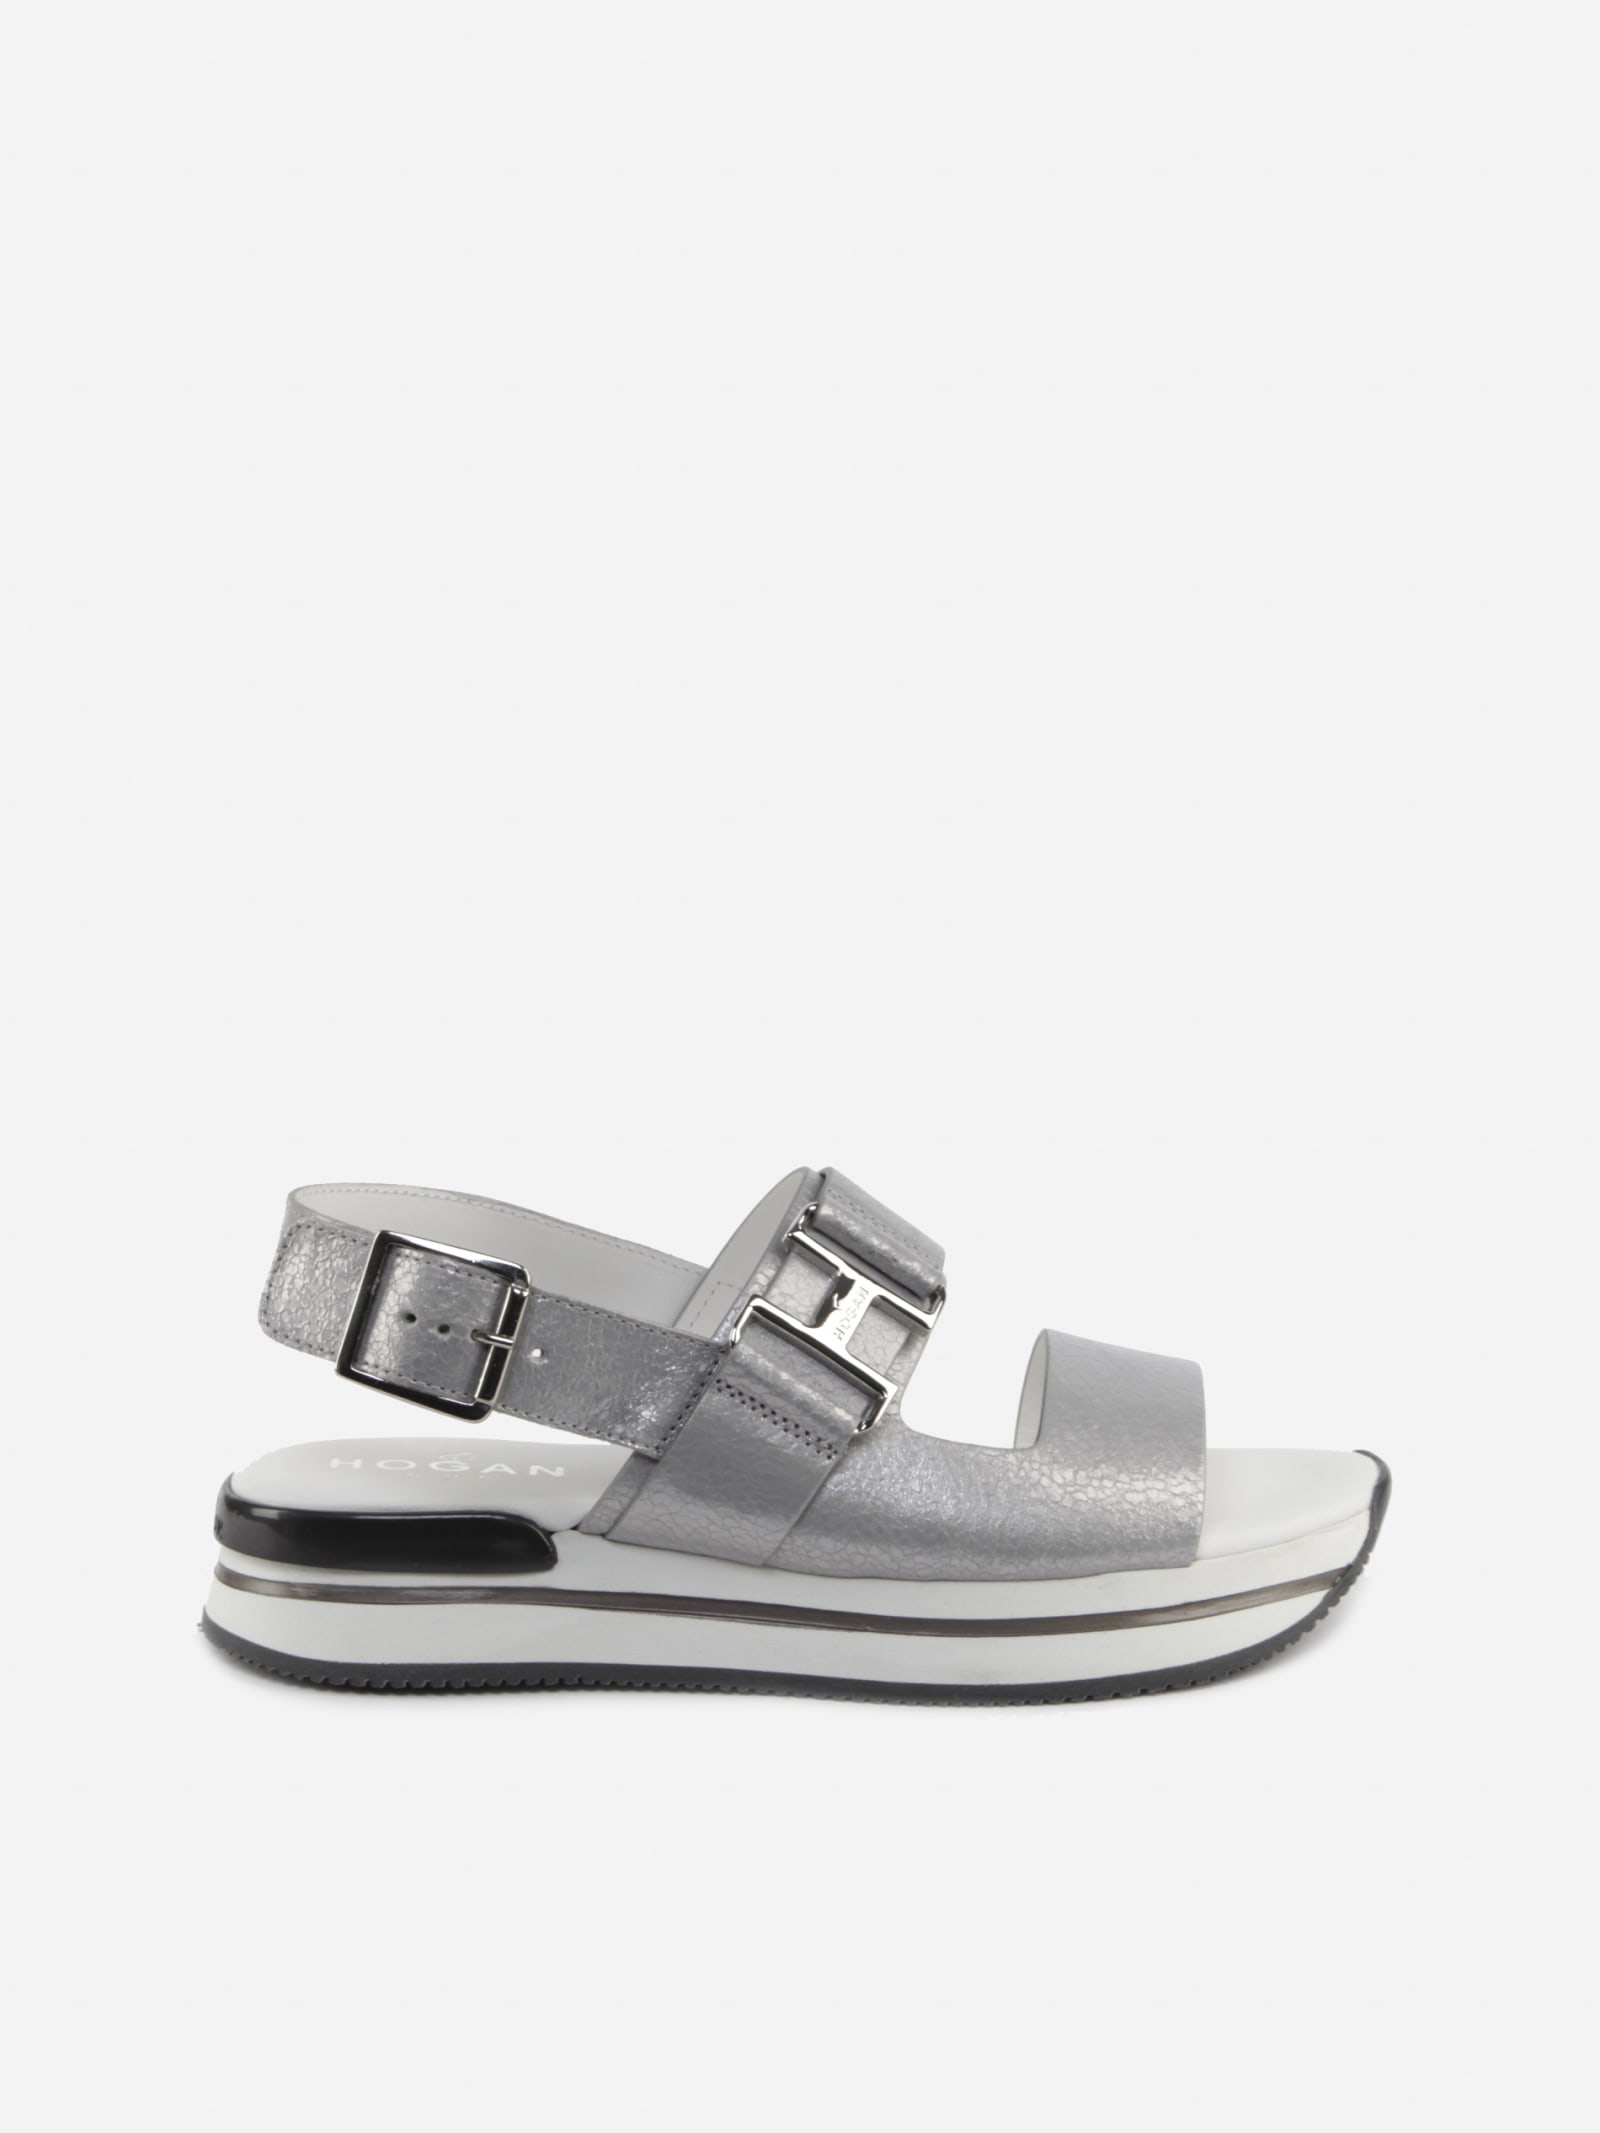 Hogan Sandals H222 SANDALS IN LEATHER WITH A PEARLY FINISH